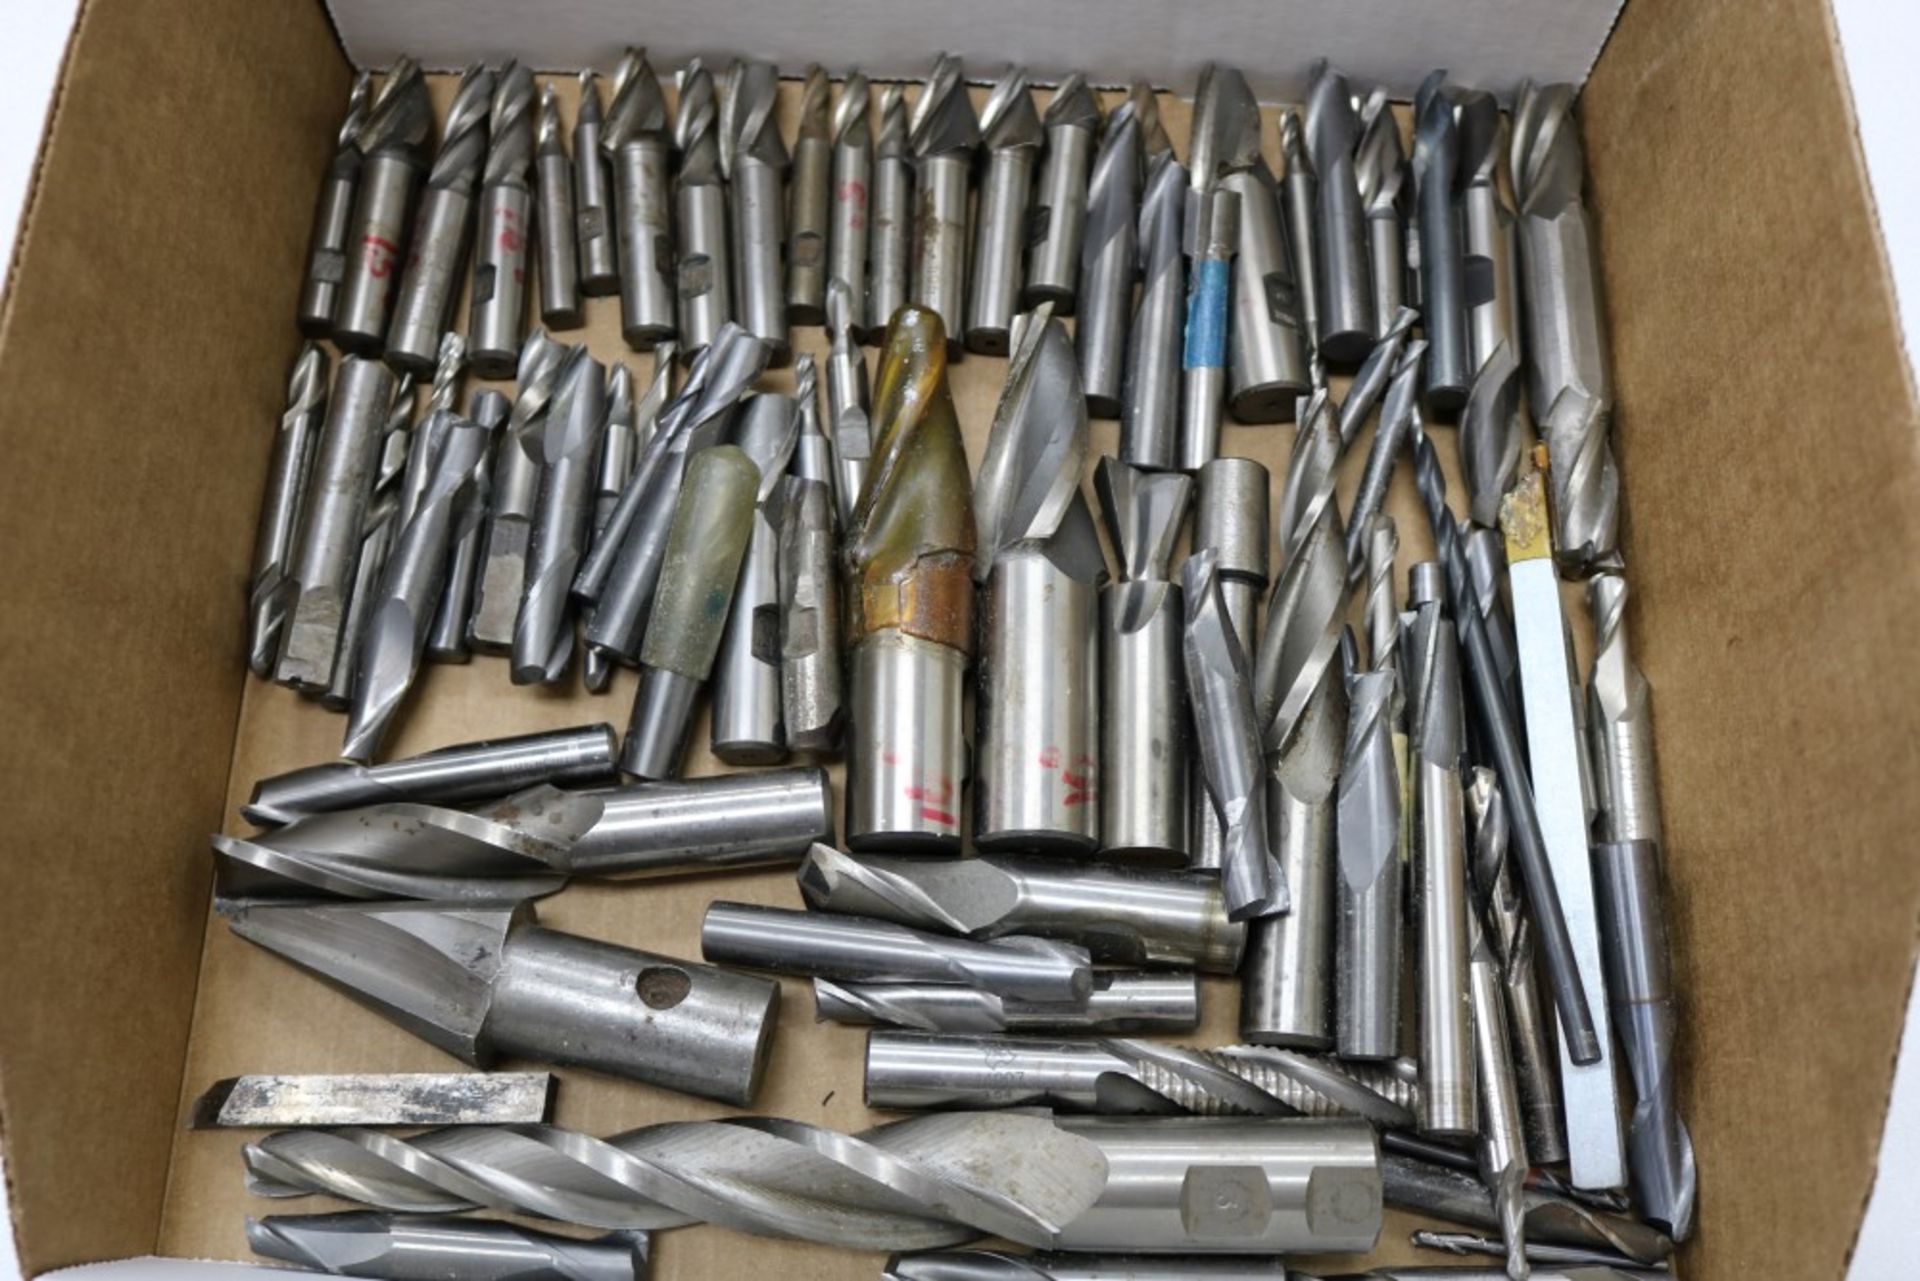 Box of Used End Mill Drills and Others Cut Mostly Plastic - Image 2 of 3